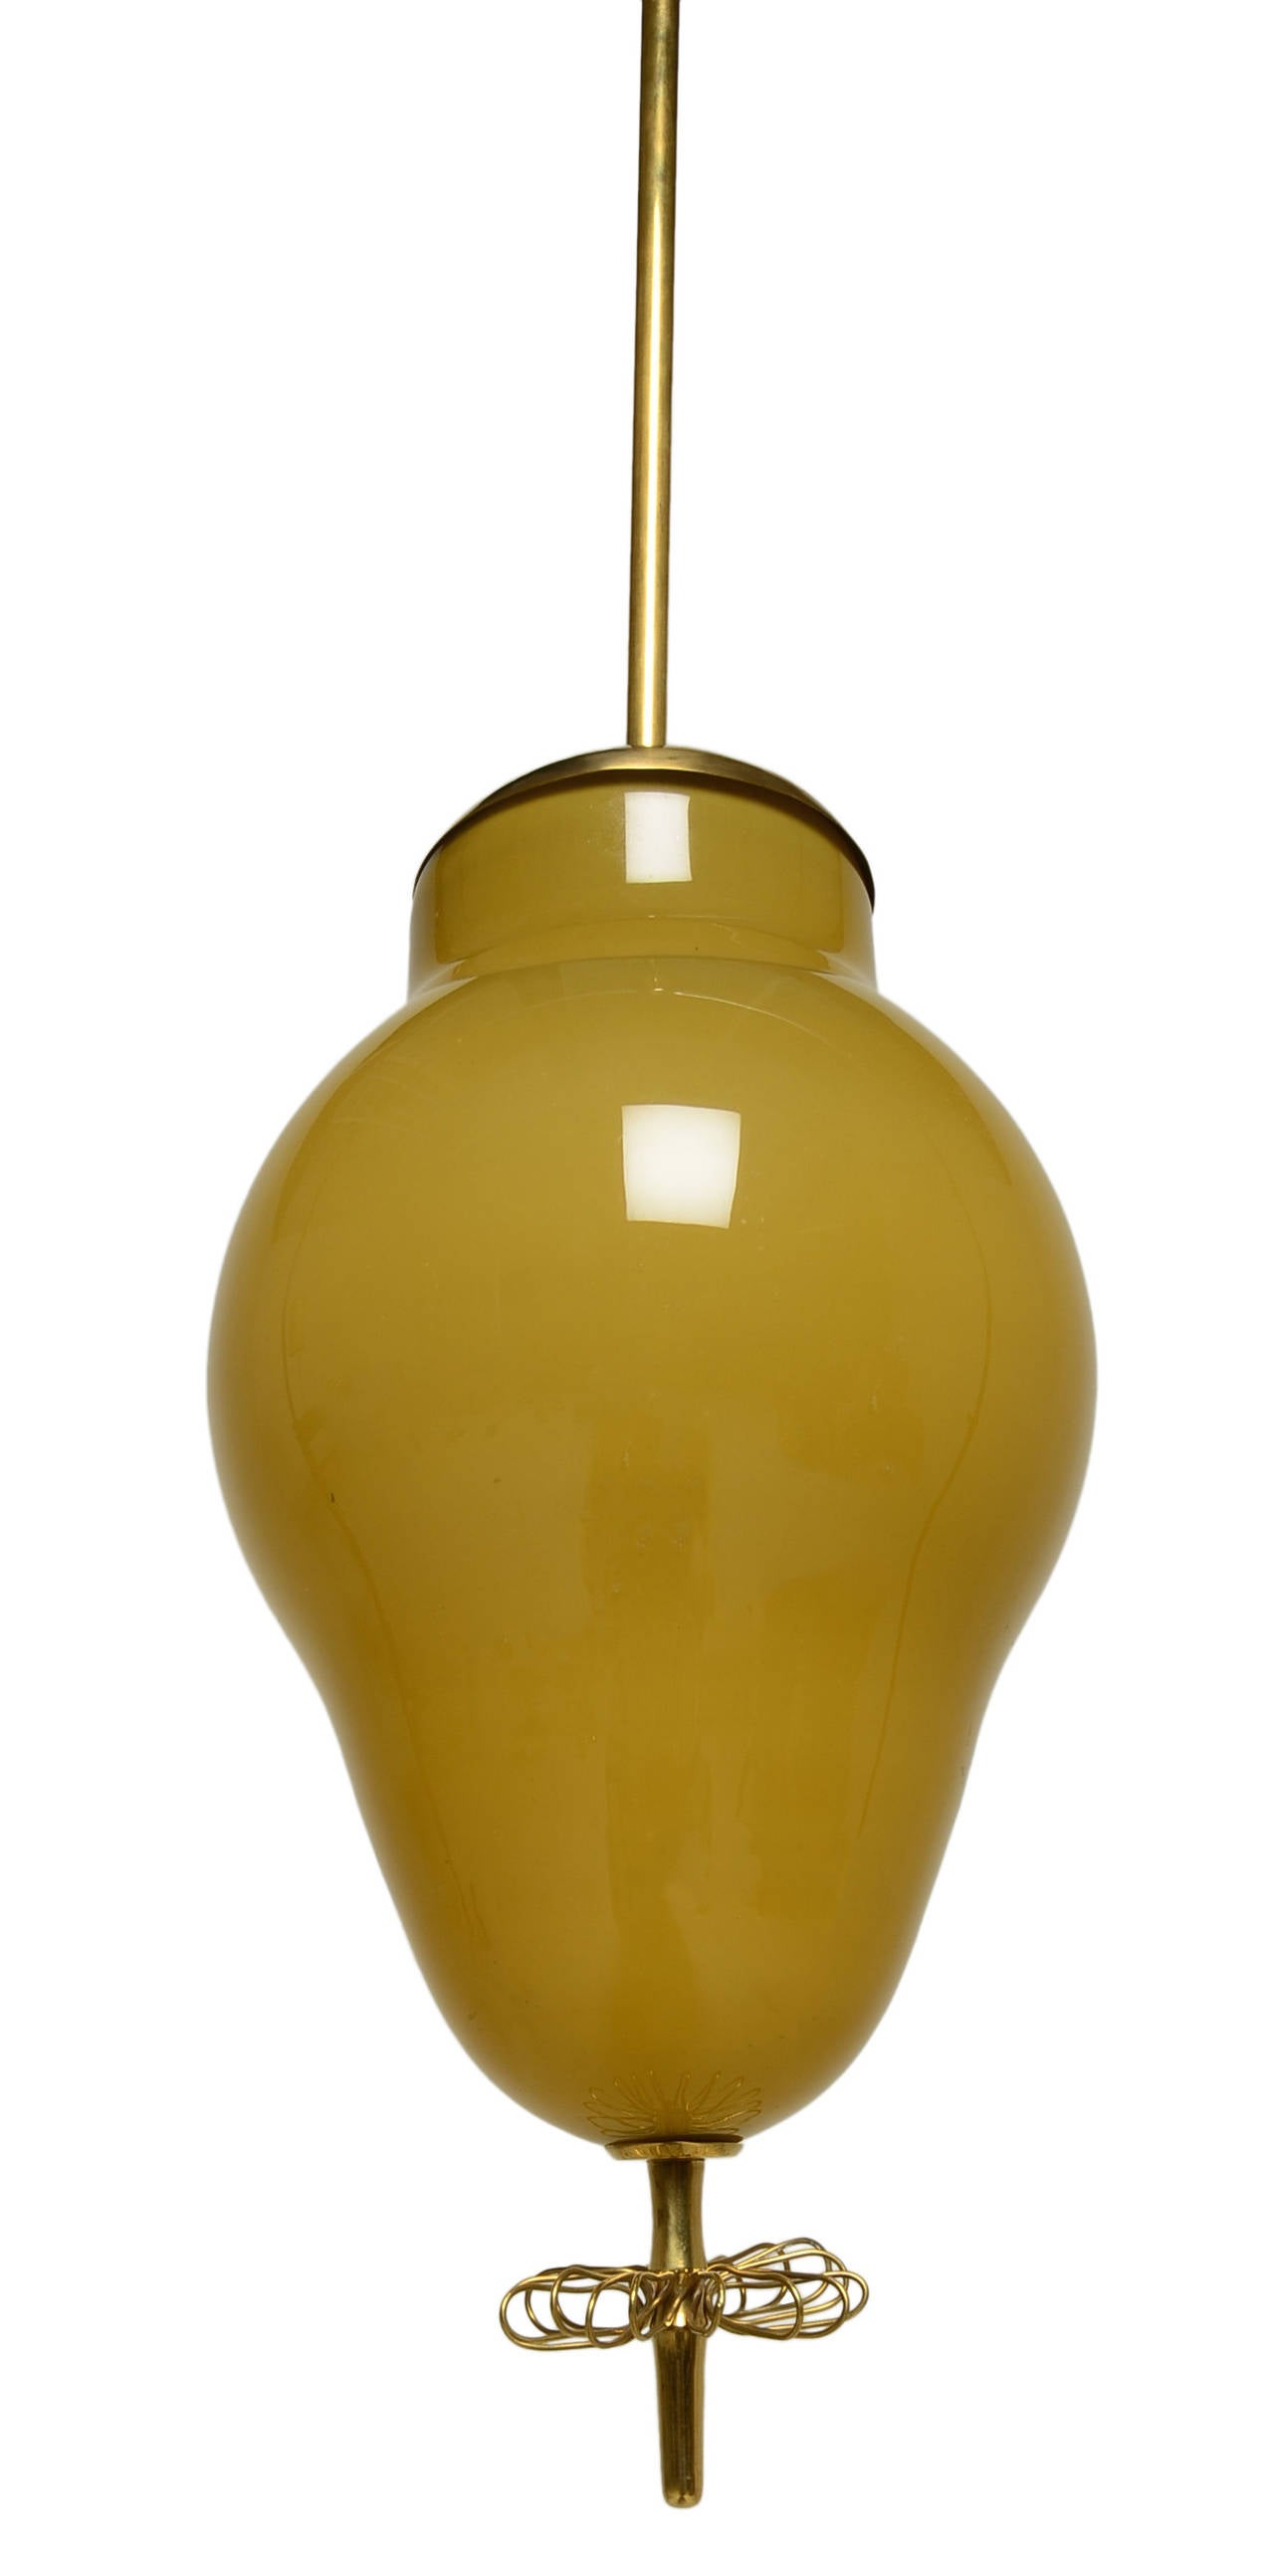 A wonderful hand blown glass and brass drop pendant by Scandinavian master Paavo Tynell for Taito Oy.
Handcrafted and of exceptional quality.

A small jewel-like masterpiece of lighting.